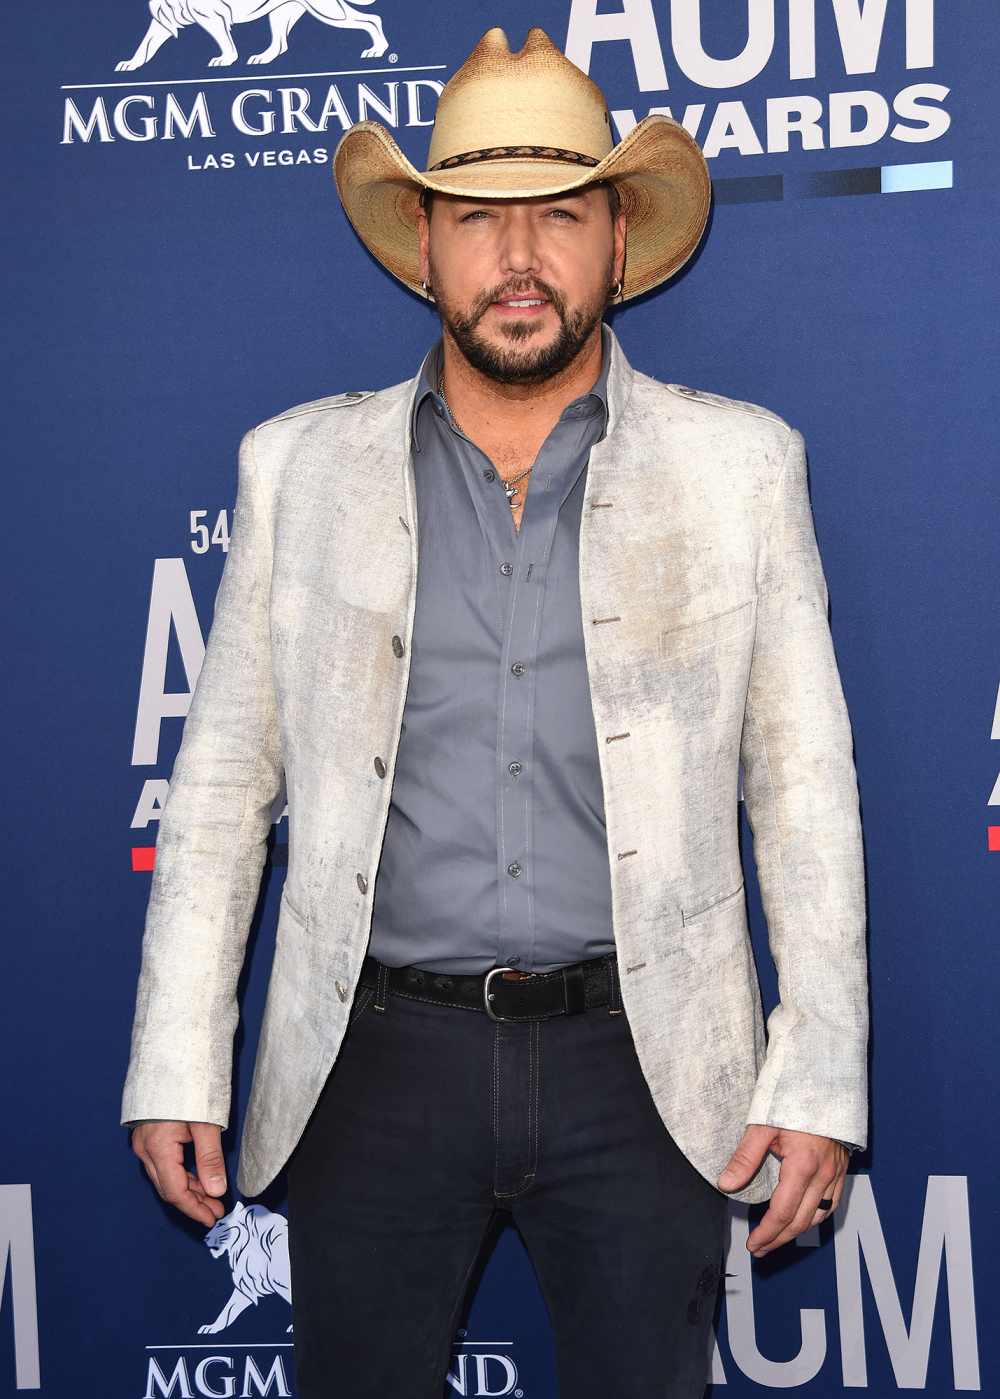 Jason Aldean 'Finally Figured Out' How to Balance His Career and Family